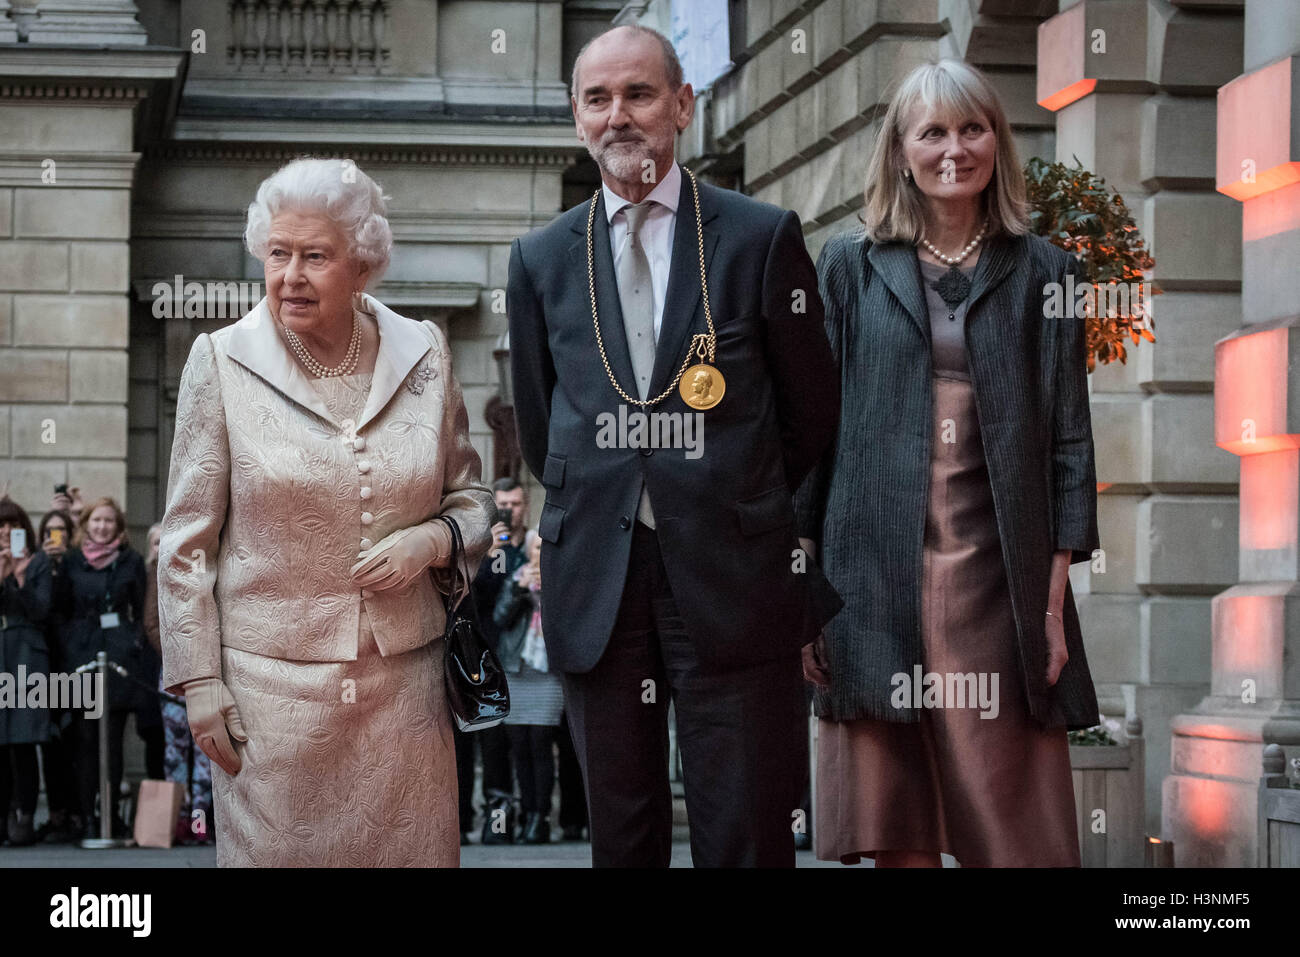 London, UK. 11th October, 2016. The Queen attends awards ceremony at the Royal Academy of Arts Credit:  Guy Corbishley/Alamy Live News Stock Photo